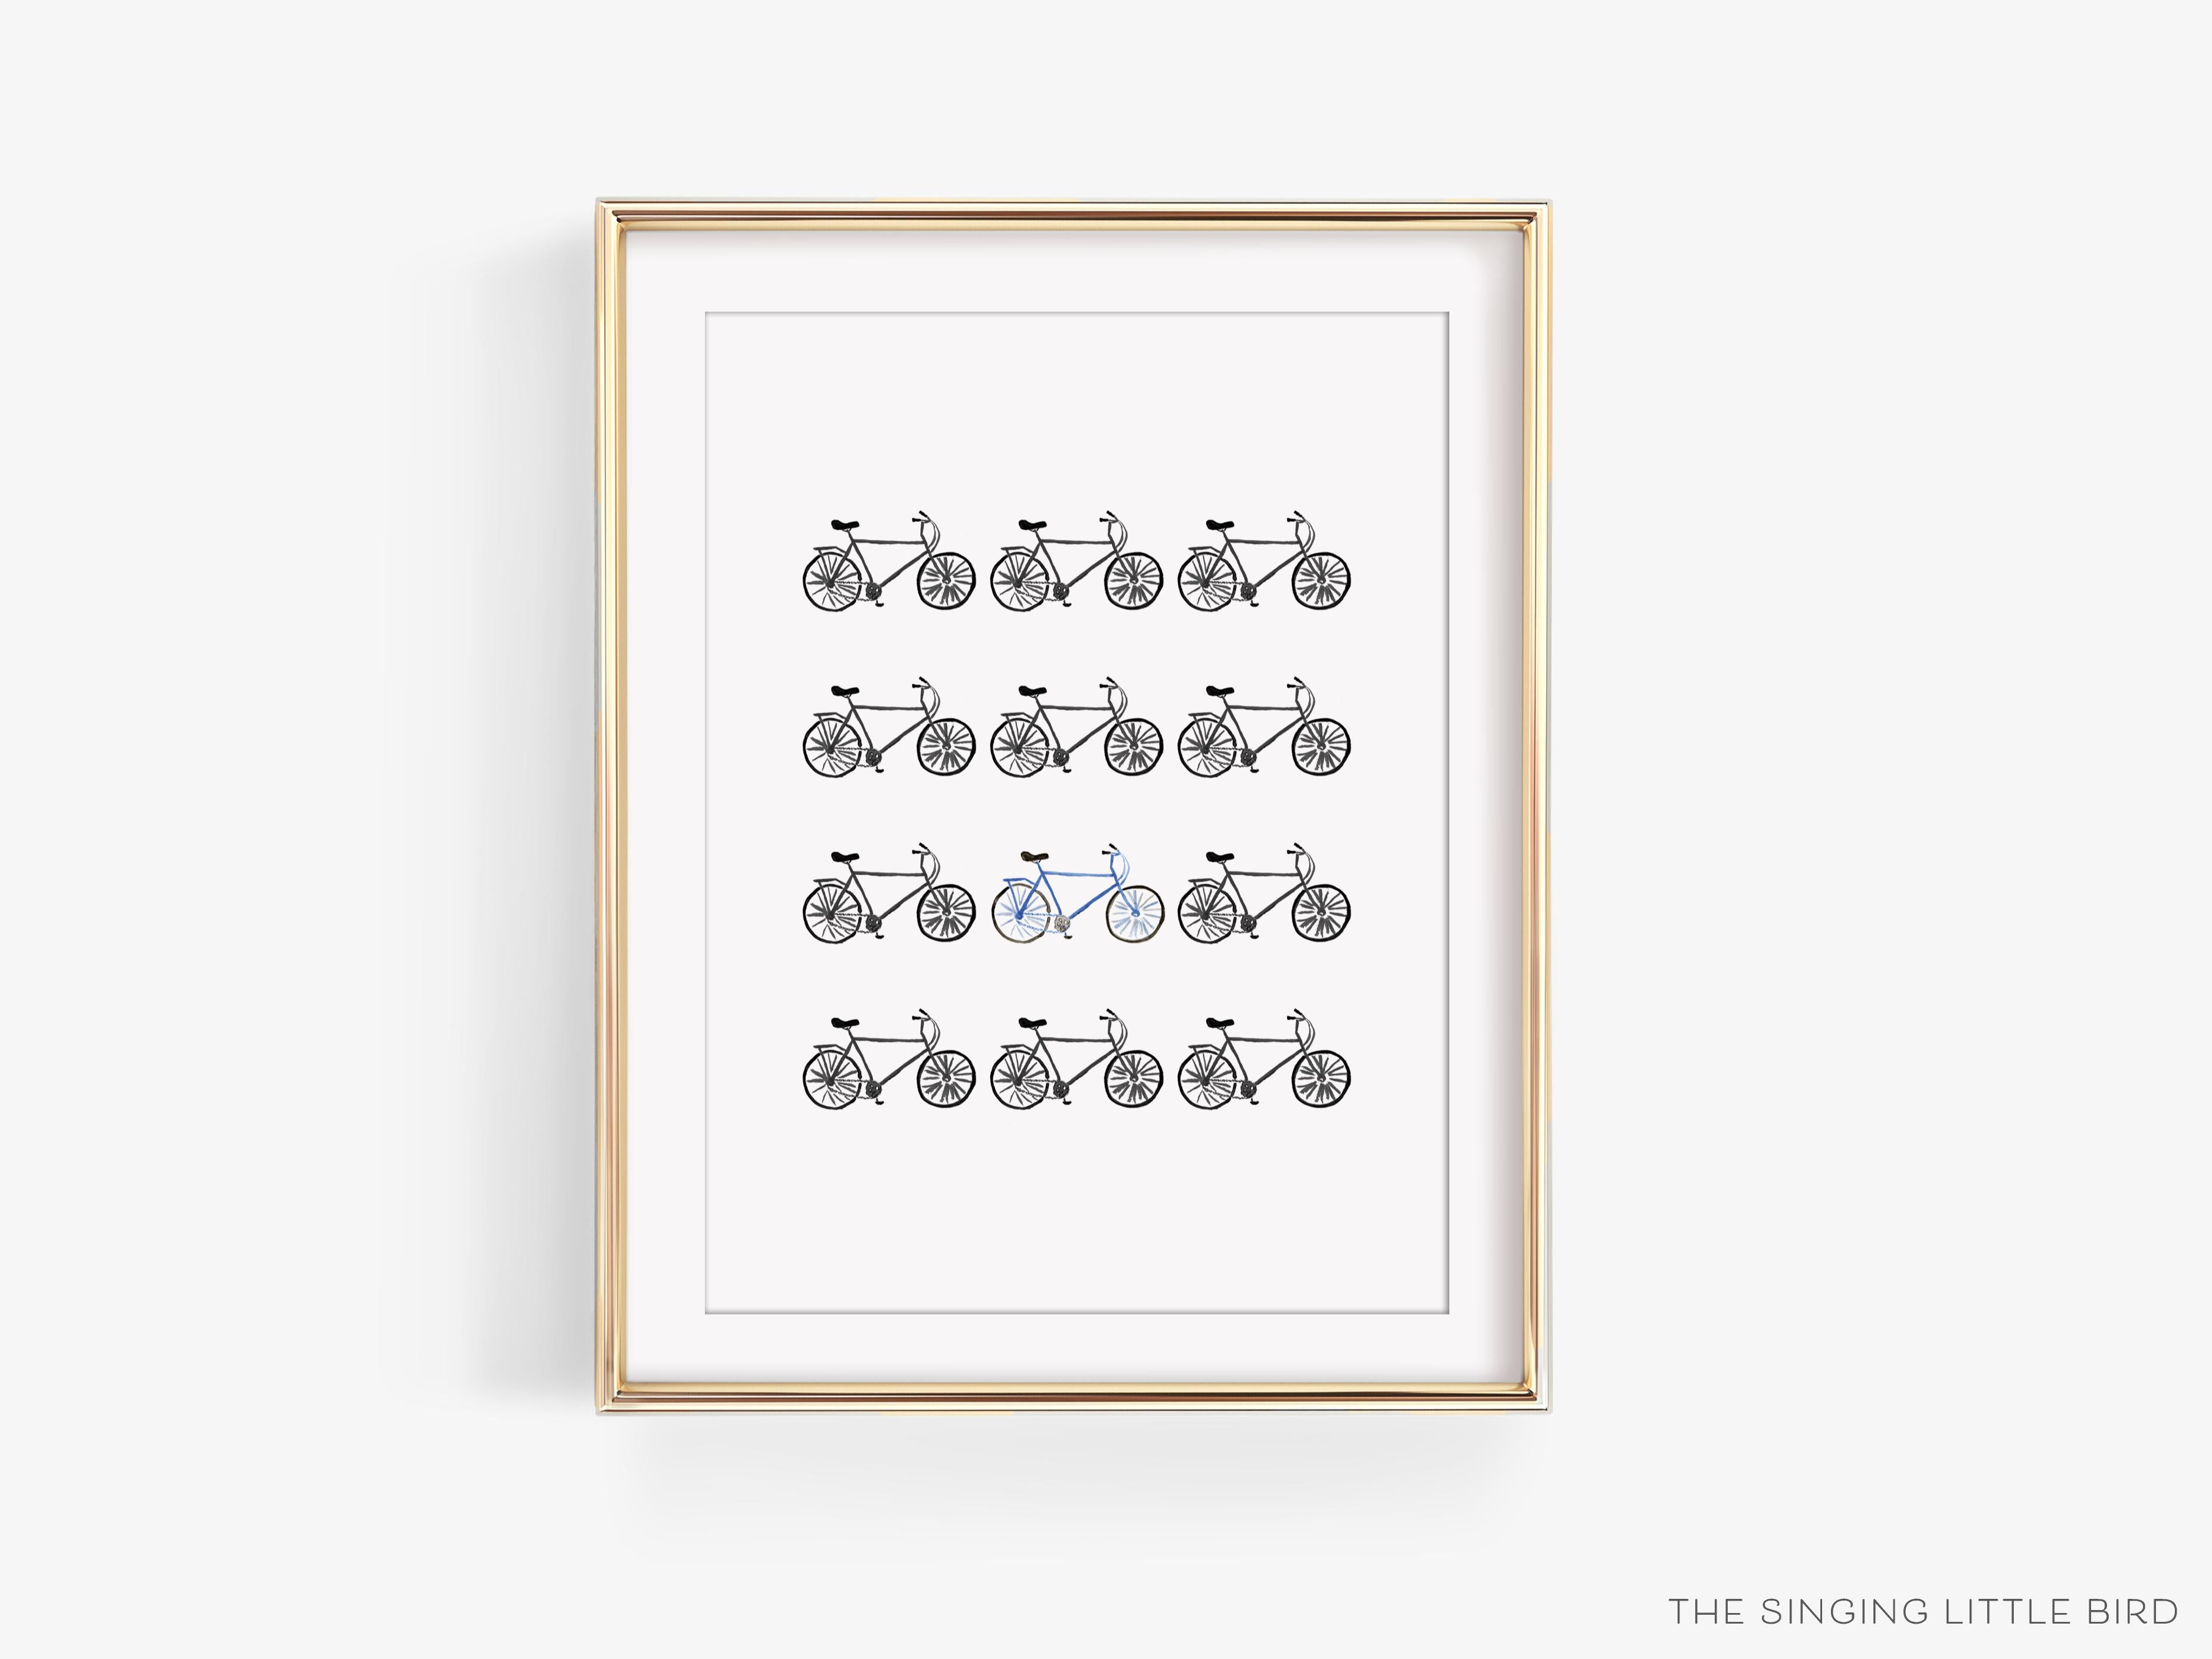 Multi-Bicycle Art Print-This watercolor art print features our hand-painted bicycles, printed in the USA on 120lb high quality art paper. This makes a great gift or wall decor for the bike lover in your life.-The Singing Little Bird